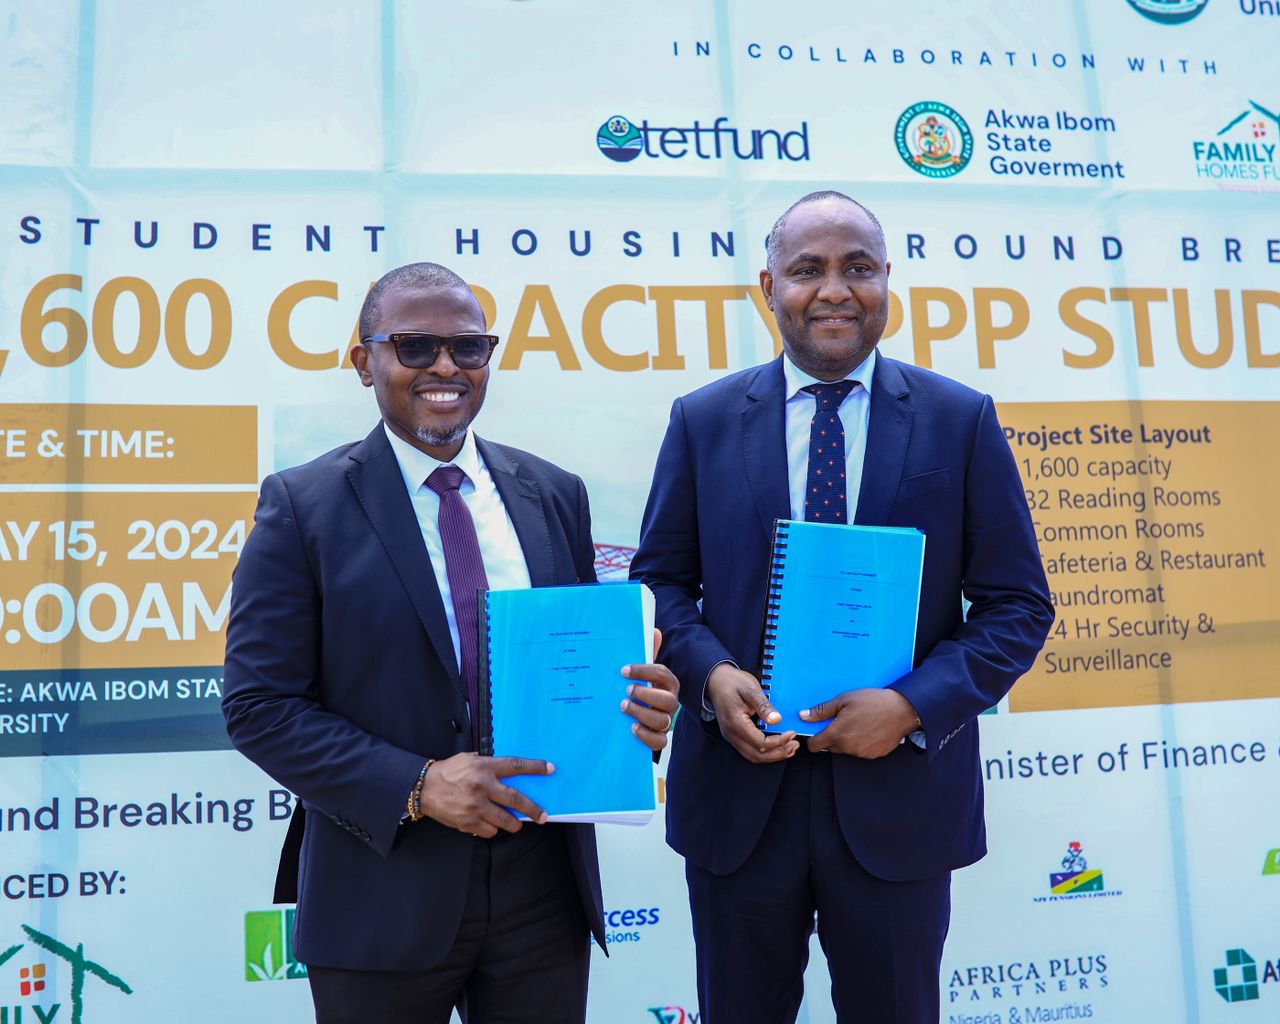 Africa Plus Partners launches its National Student Housing Program covering 24 Tertiary Institutions Across Nigeria